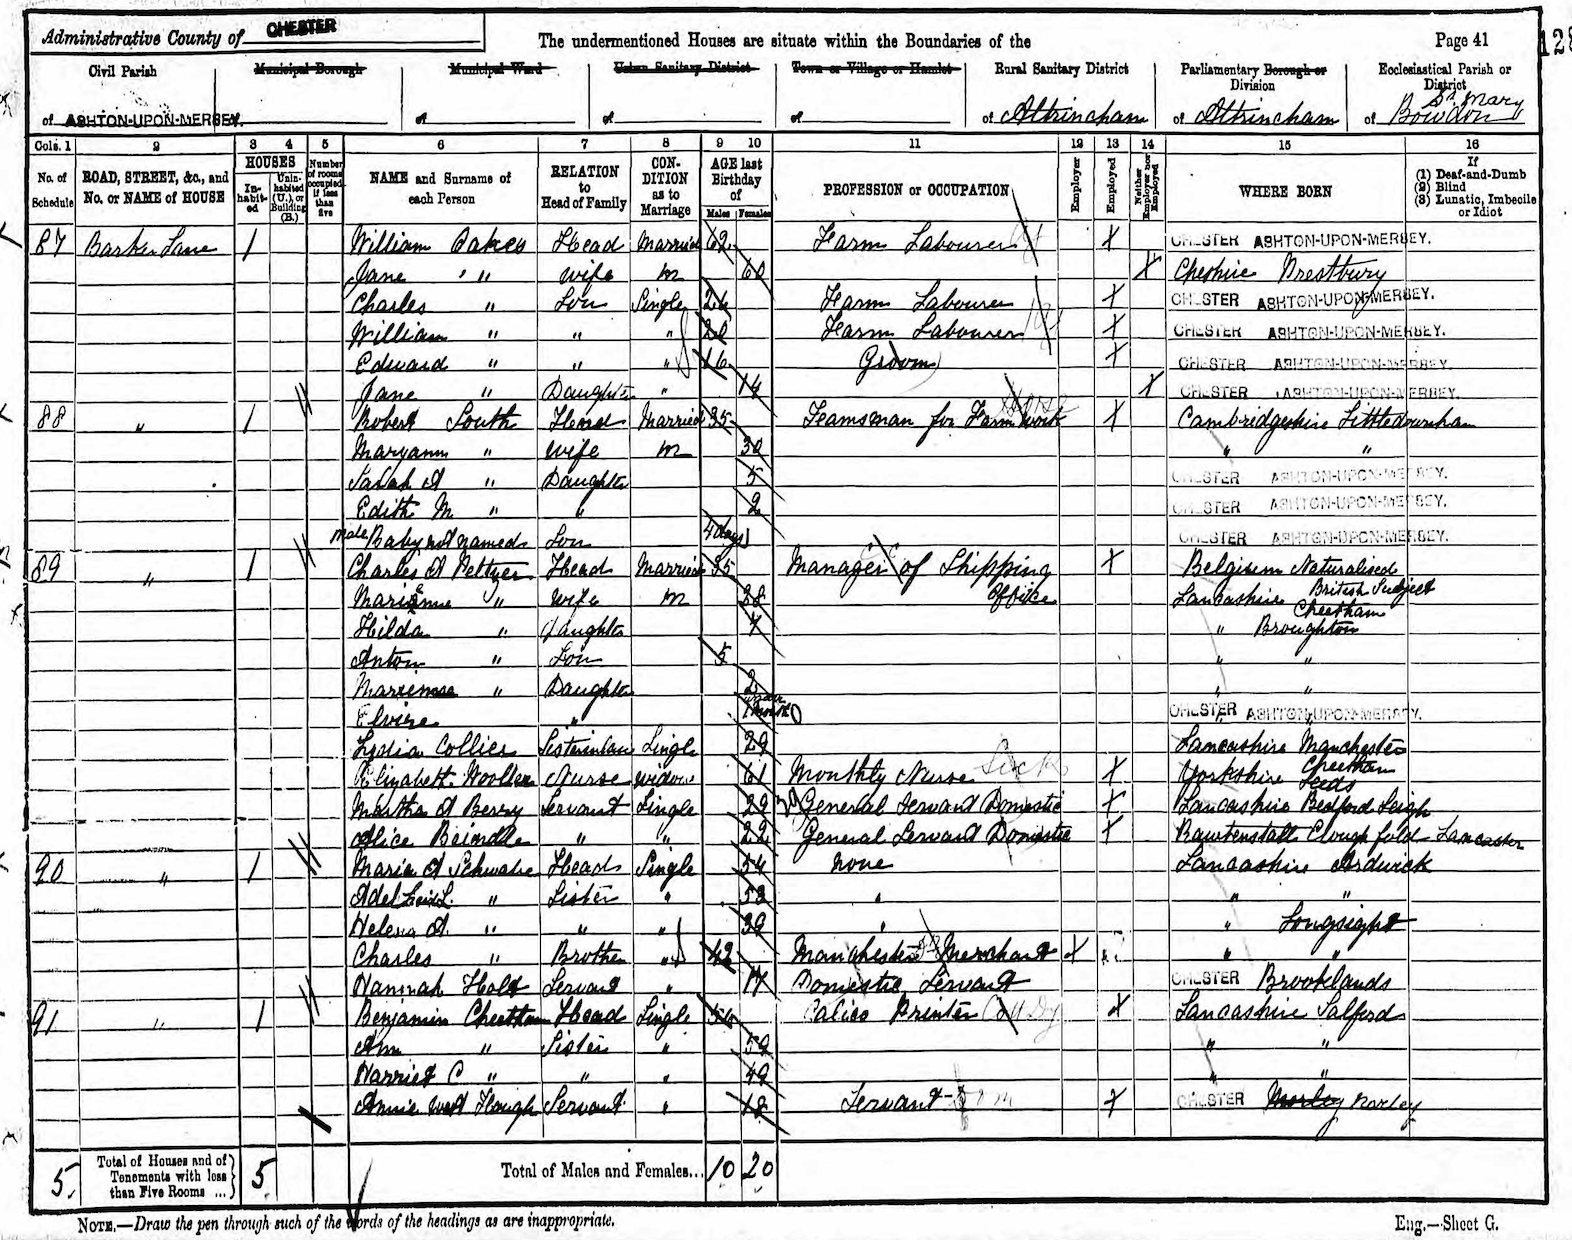 Schwabe on the 1891 census